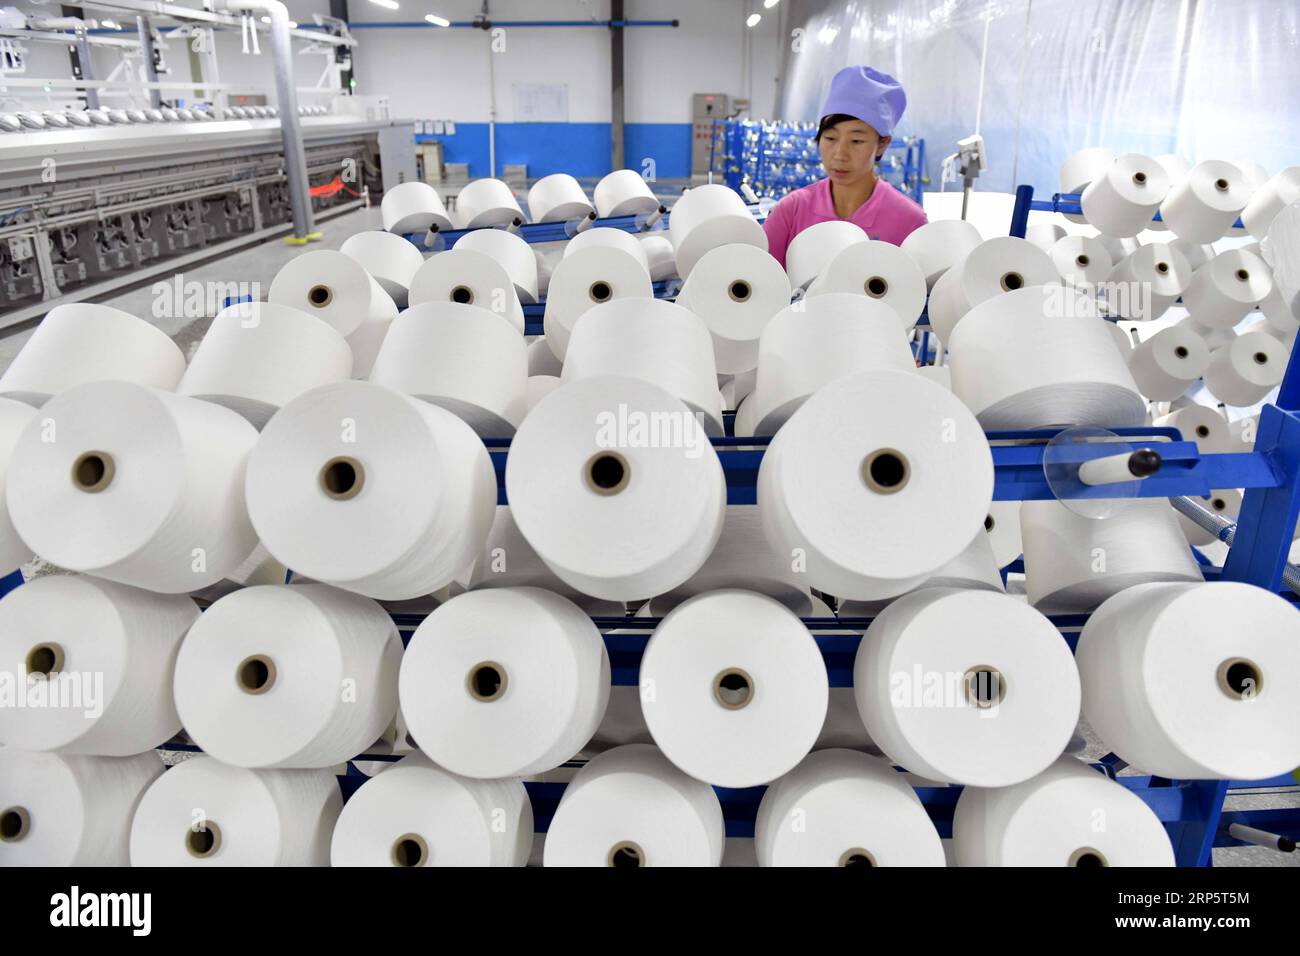 (181223) -- BEIJING, Dec. 23, 2018 (Xinhua) -- An employee arranges thread reels at a textile technology industrial park in Hongsibao of Wuzhong City, northwest China s Ningxia Hui Autonomous Region, Sept. 8, 2018. Areas of China suffering from extreme poverty have made faster progress in terms of poverty relief compared to the country s average pace in 2018, an official has said. The country has earnestly pushed ahead with poverty relief efforts in areas burdened by extreme poverty this year, said Liu Yongfu, director of the State Council Leading Group Office of Poverty Alleviation and Develo Stock Photo